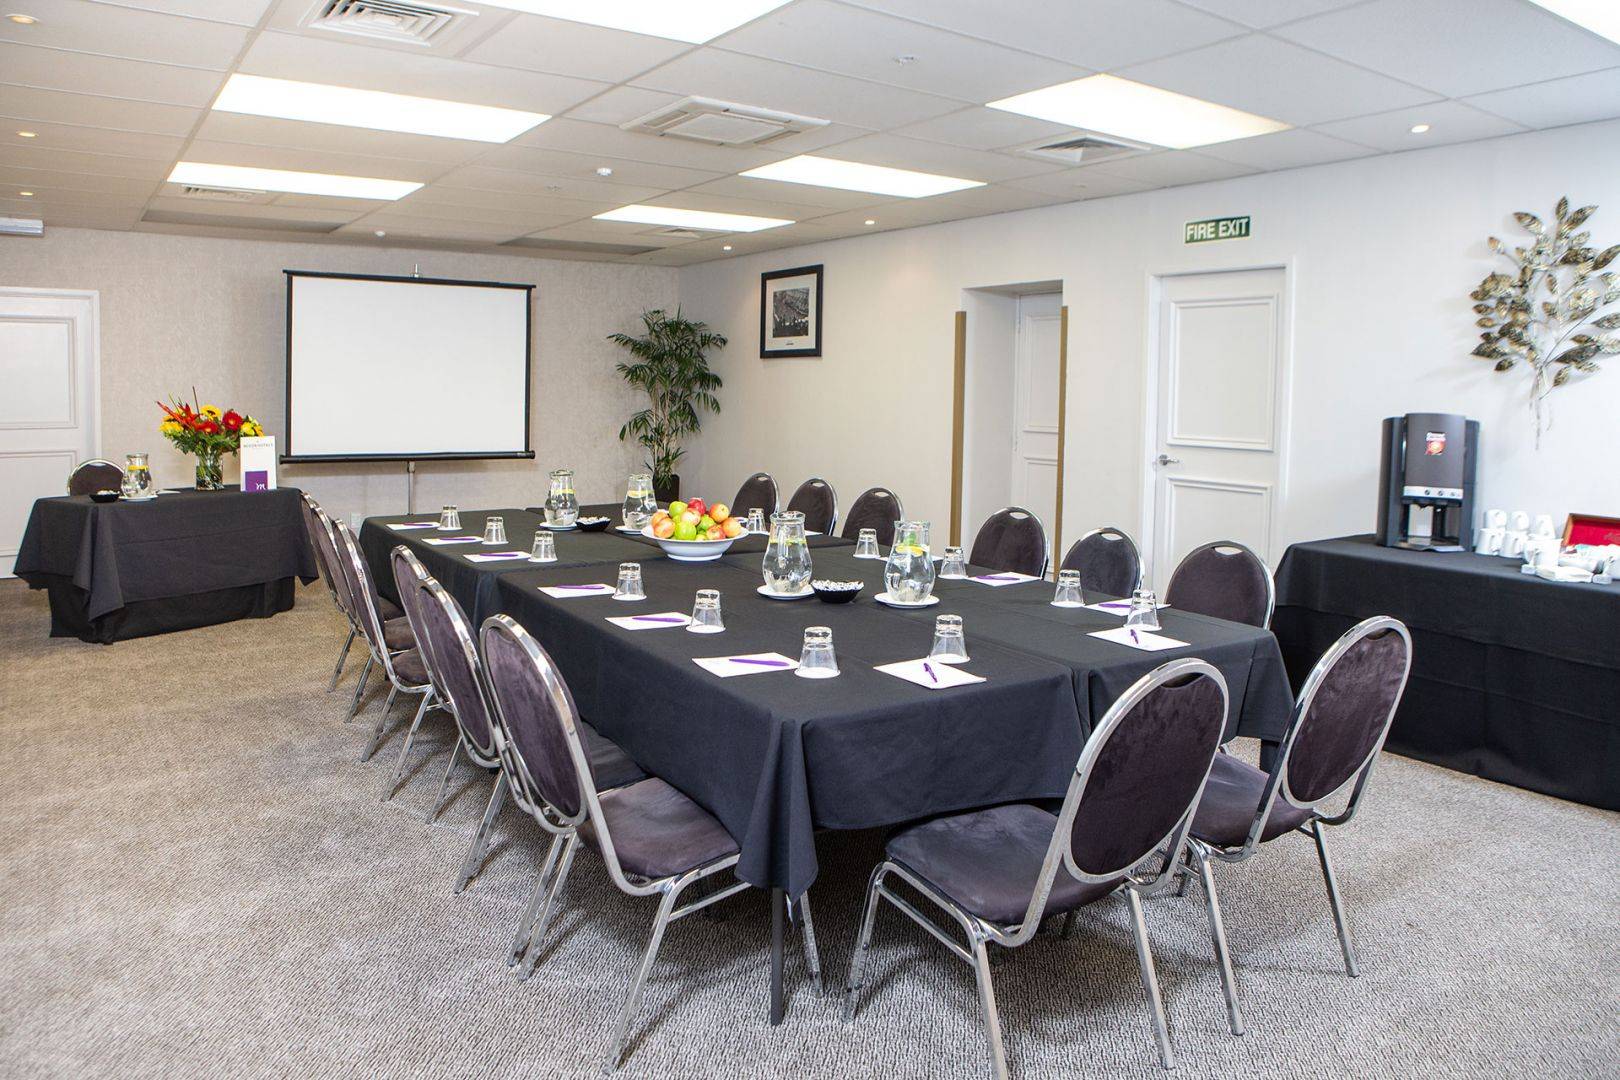 A windowless meeting room with a long table and chairs facing a projector screen on the wall.